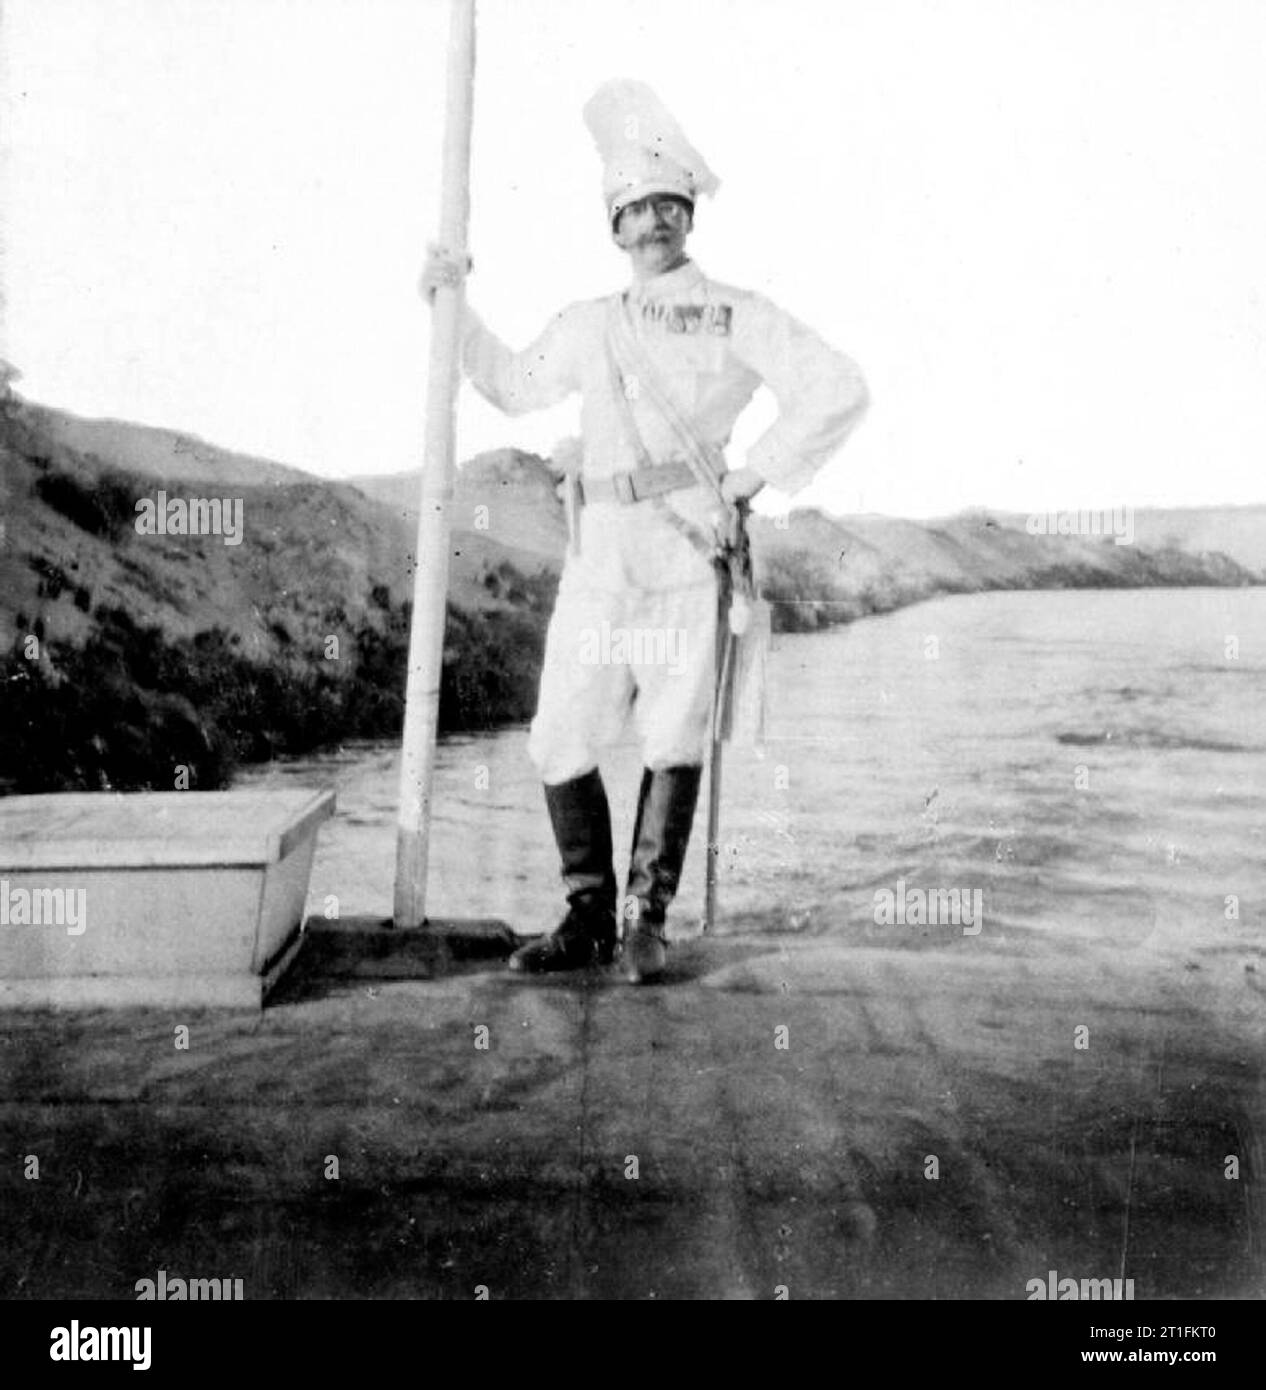 General Kitchener and the Anglo-egyptian Nile Campaign, 1898 Captain Adolf von Tiedemann, German Military attachÃ? and observer of the Campaign, poses in full dress uniform beside the River Nile after the Battle of Omdurman, during which Anglo Egyptian forces regained control of the city of Khartoum. Von Tiedemann accompanied Lord Kitchener when he travelled by boat to Khartoum for the ceremony to commemorate the death of General Gordon (who was killed when Khartoum fell to Mahdist forces on 26 January 1885). Stock Photo